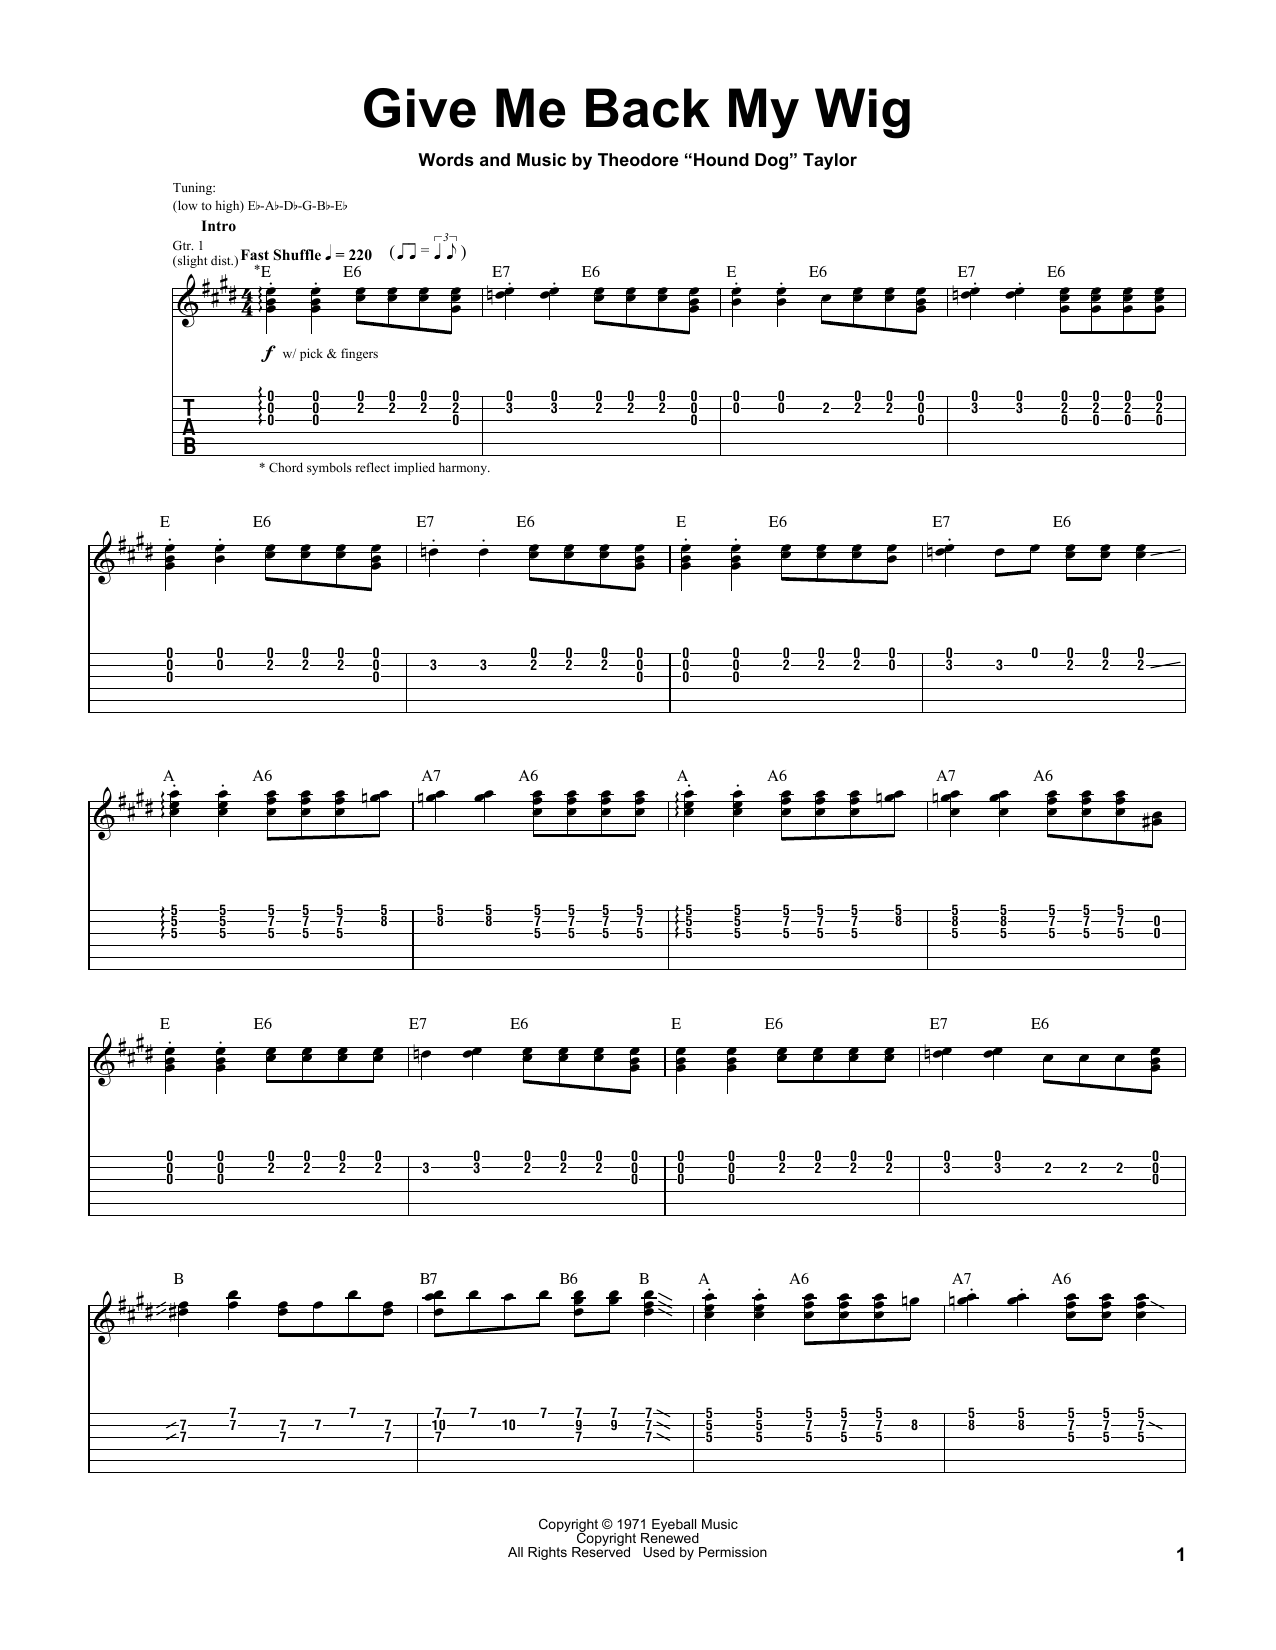 Stevie Ray Vaughan Give Me Back My Wig sheet music notes and chords. Download Printable PDF.